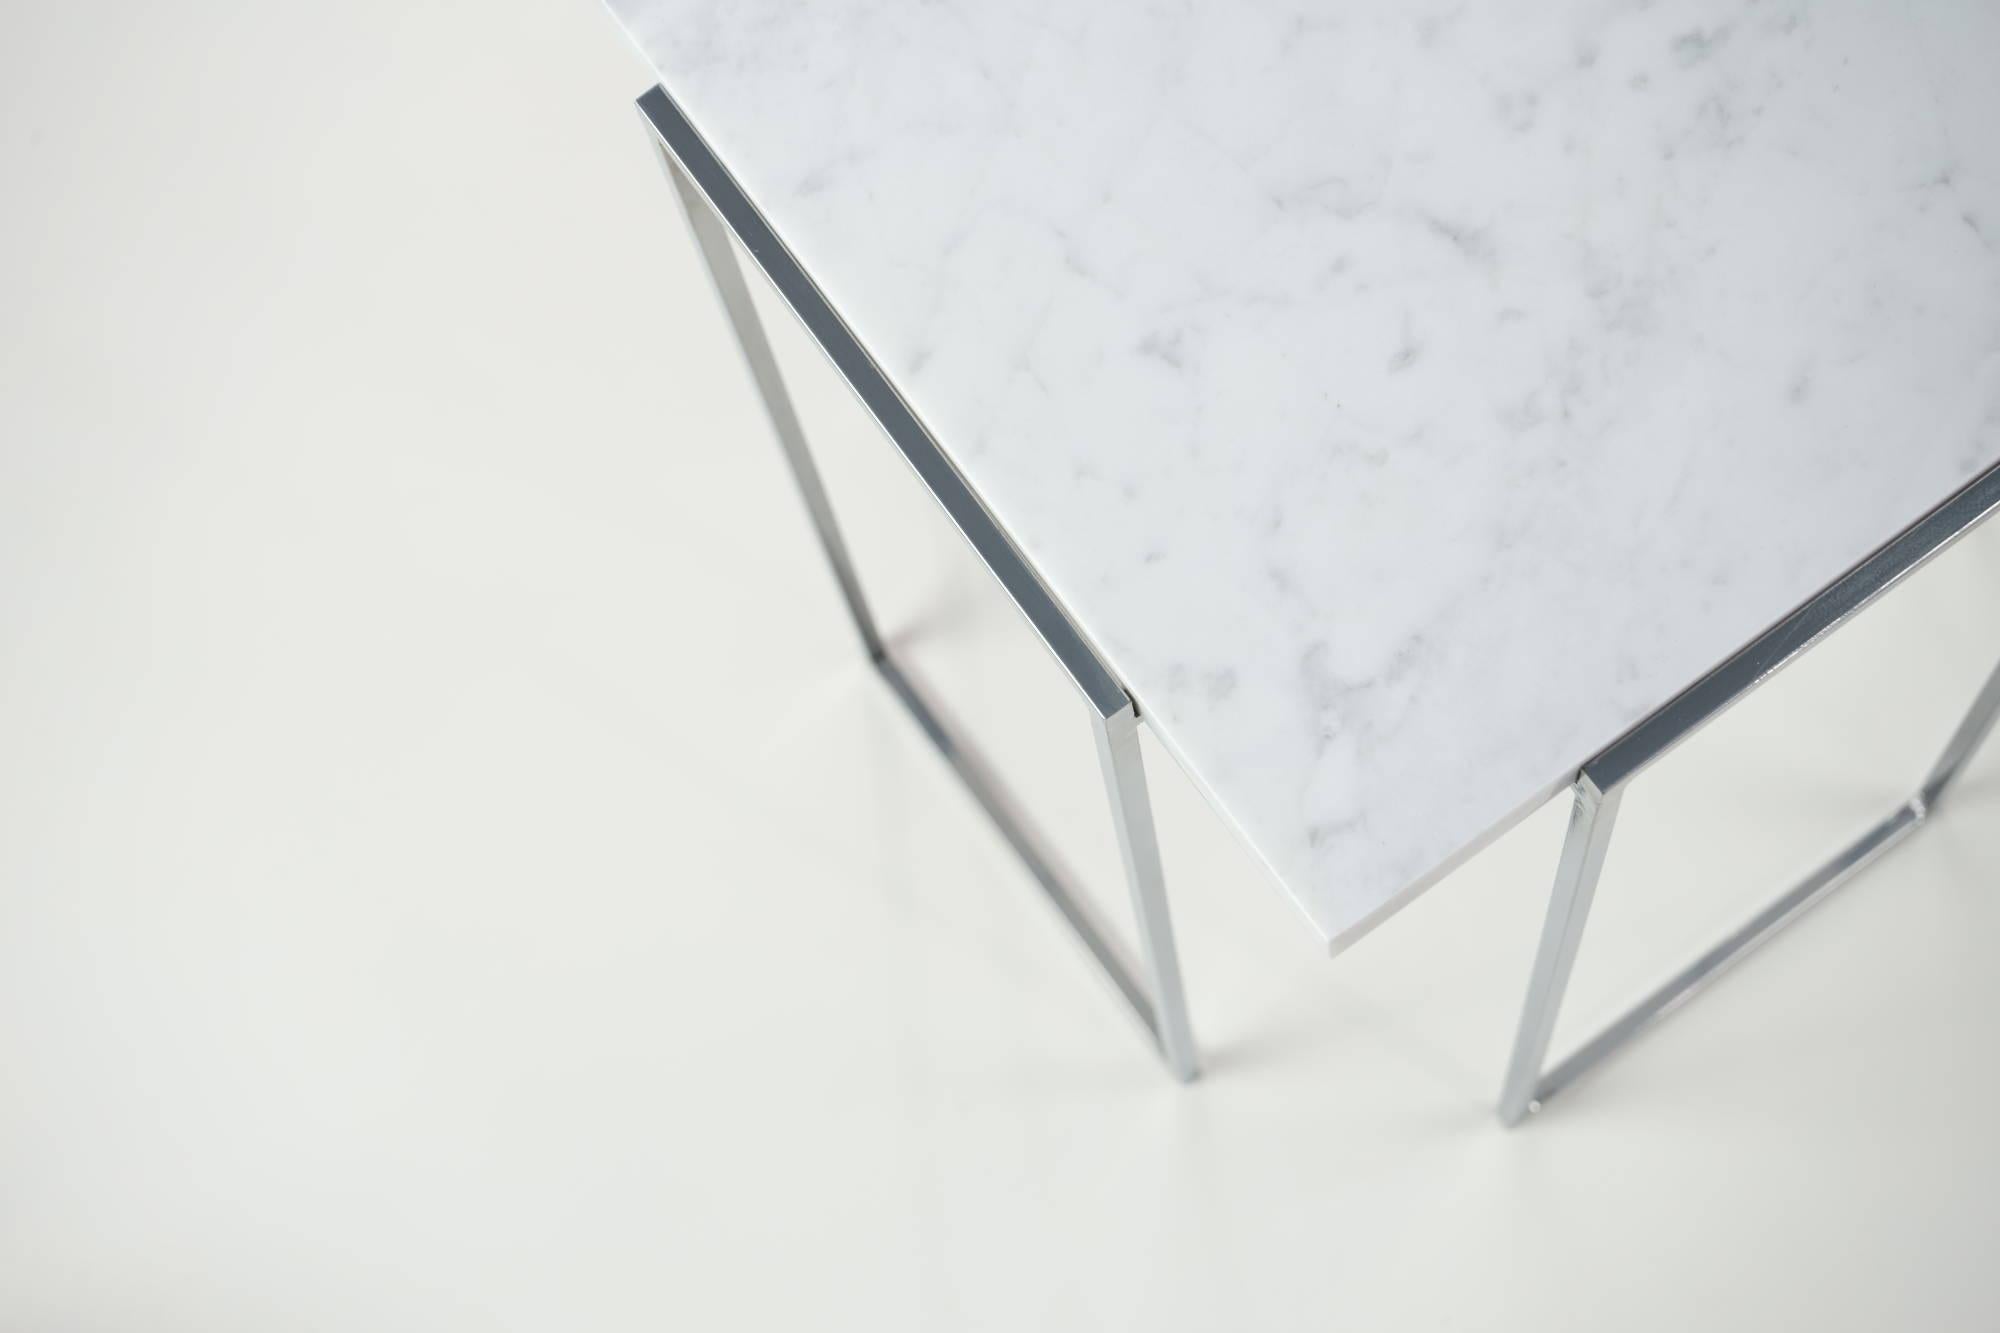 Kaus Cromo, Carrara Marble Side Table By DFdesignlab Handmade in Italy In New Condition For Sale In Campobasso, CB